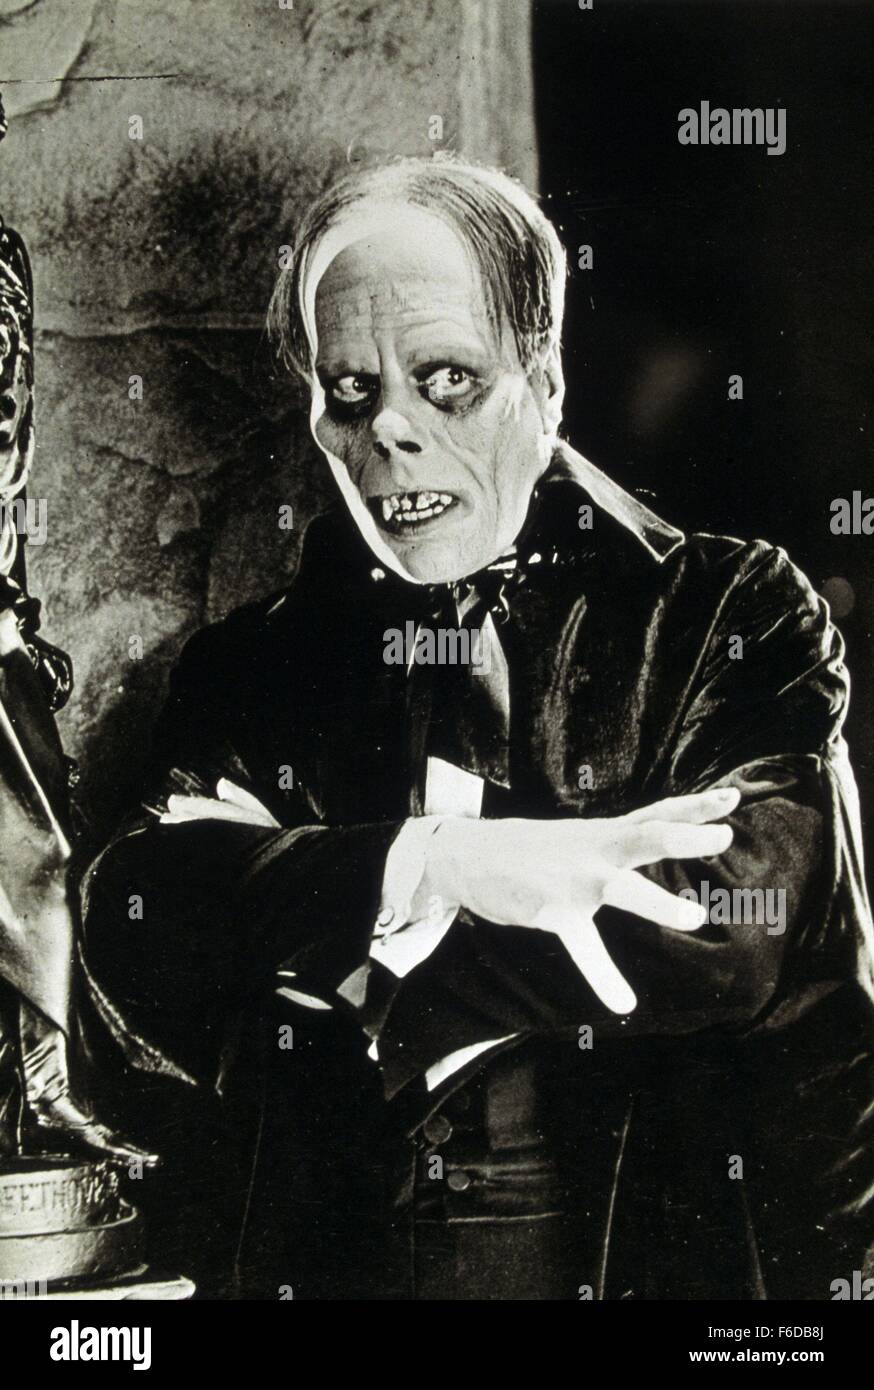 RELEASE DATE: November 15, 1925   MOVIE TITLE: PHANTOM OF THE OPERA   STUDIO: Universal Pictures   PLOT: A mad, disfigured composer seeks love with a lovely young opera singer.   PICTURED: LON CHANEY. Stock Photo